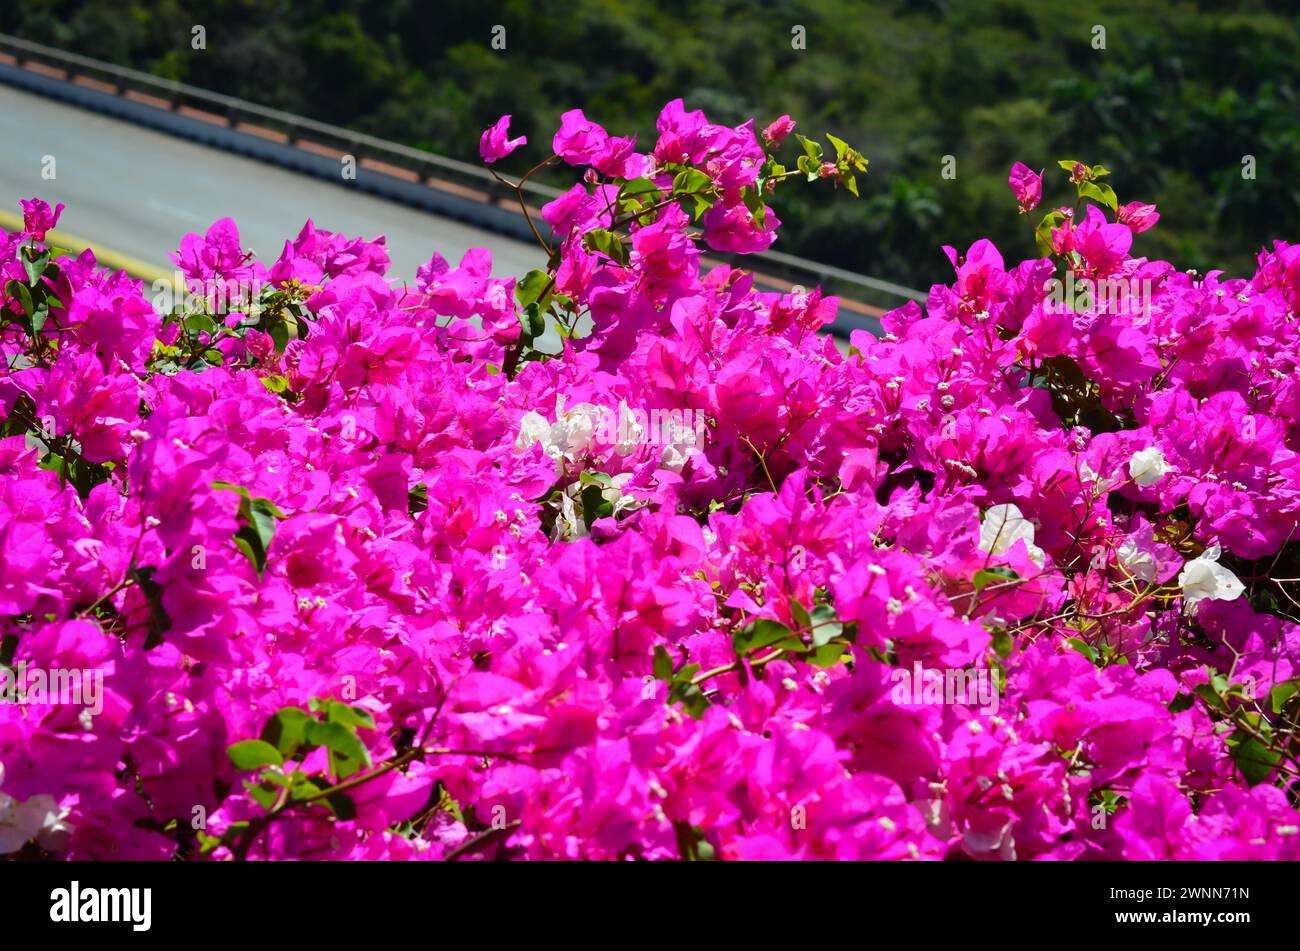 A bushel of Purple, Pink, White flowers with small green leaves, on the edge of a cliff over looking the bridge on a hot sunny day, blurred background Stock Photo